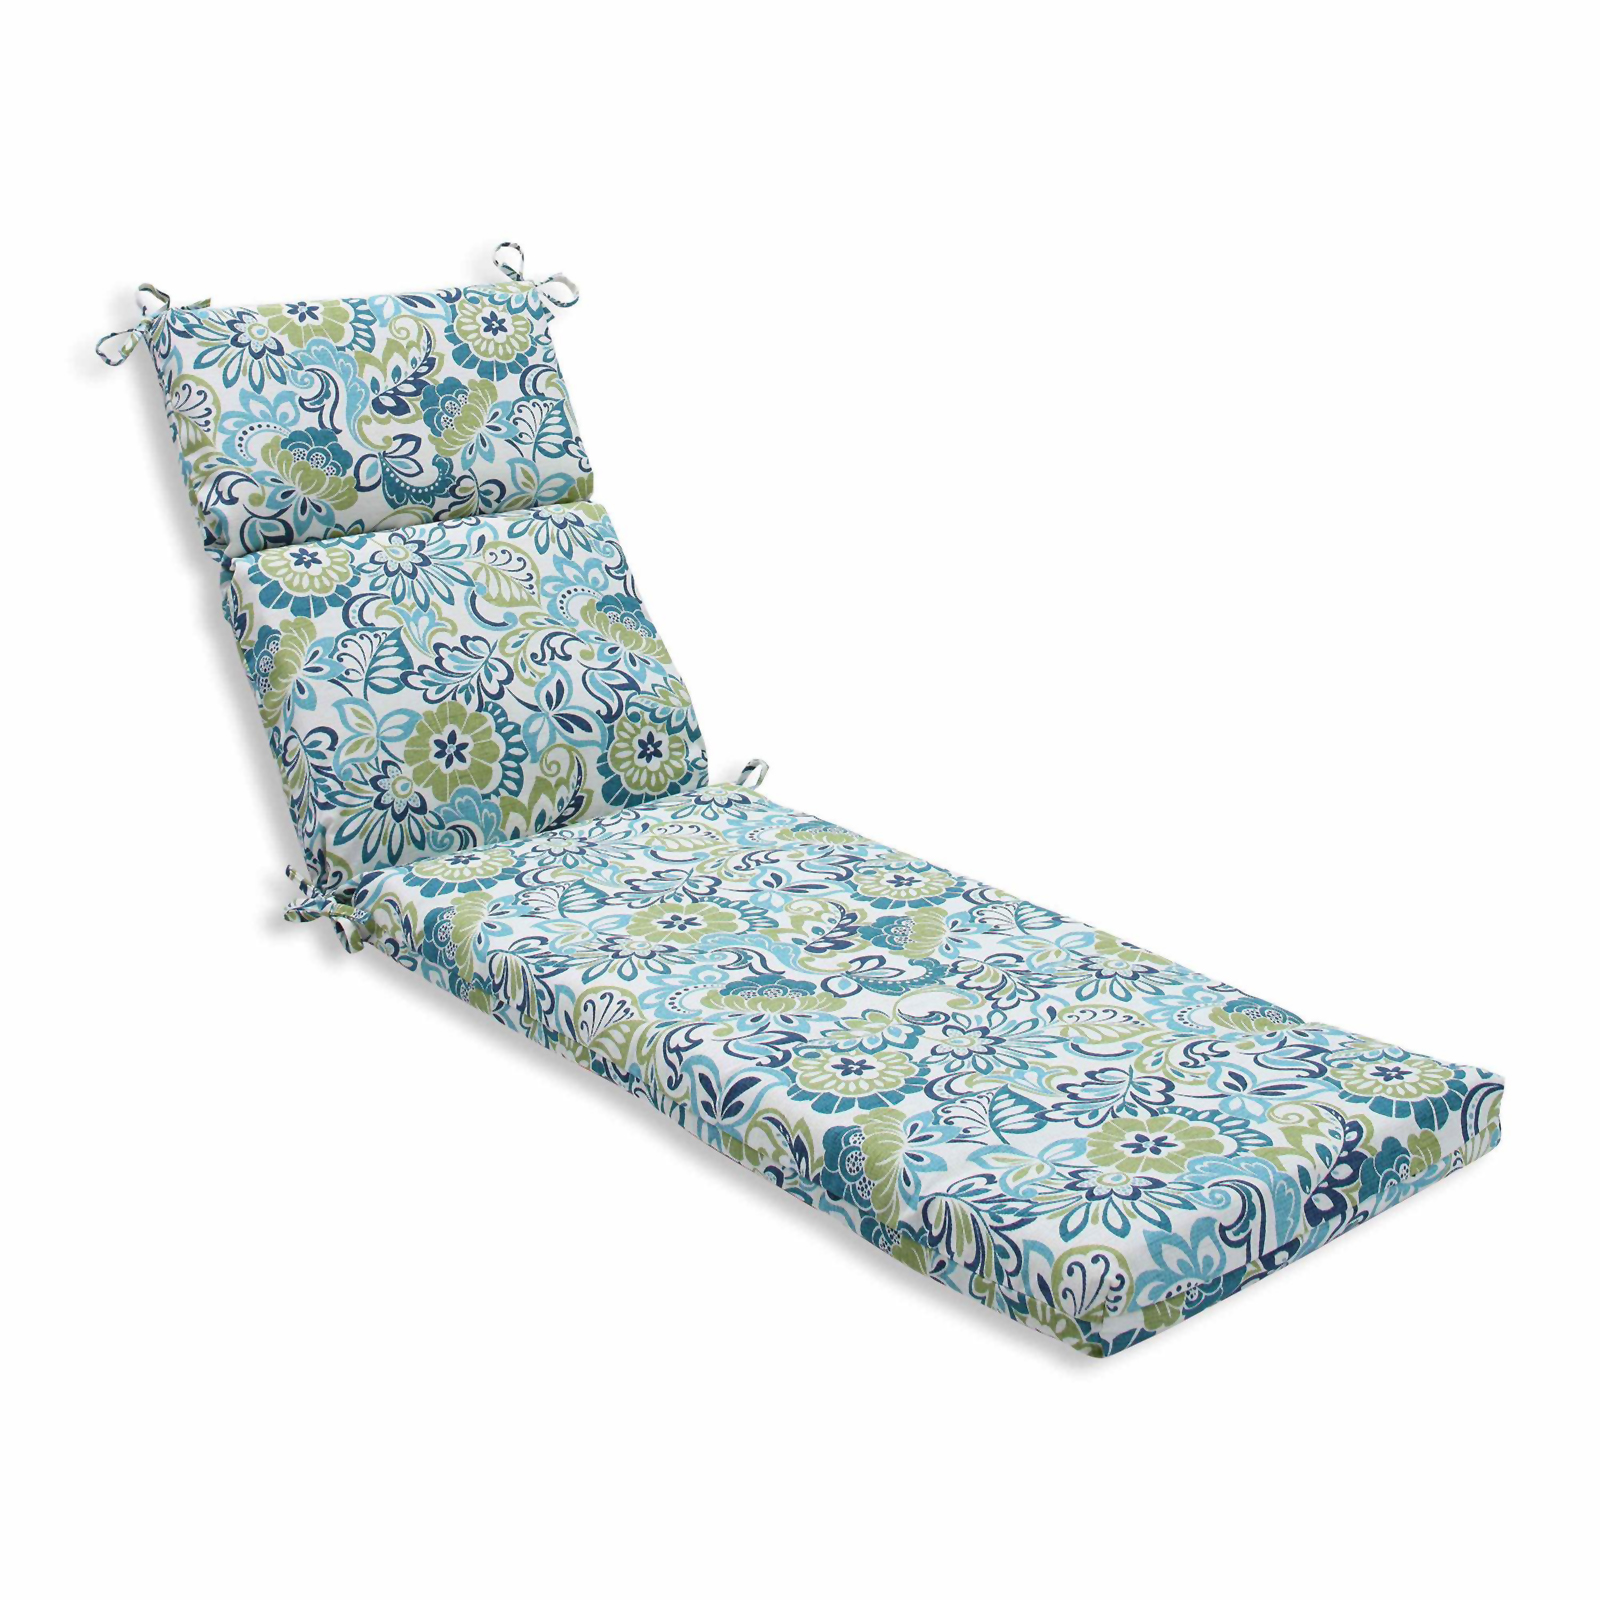 Pillow Perfect Zoe Mallard Outdoor/Indoor Polyester Chaise Lounge Cushion